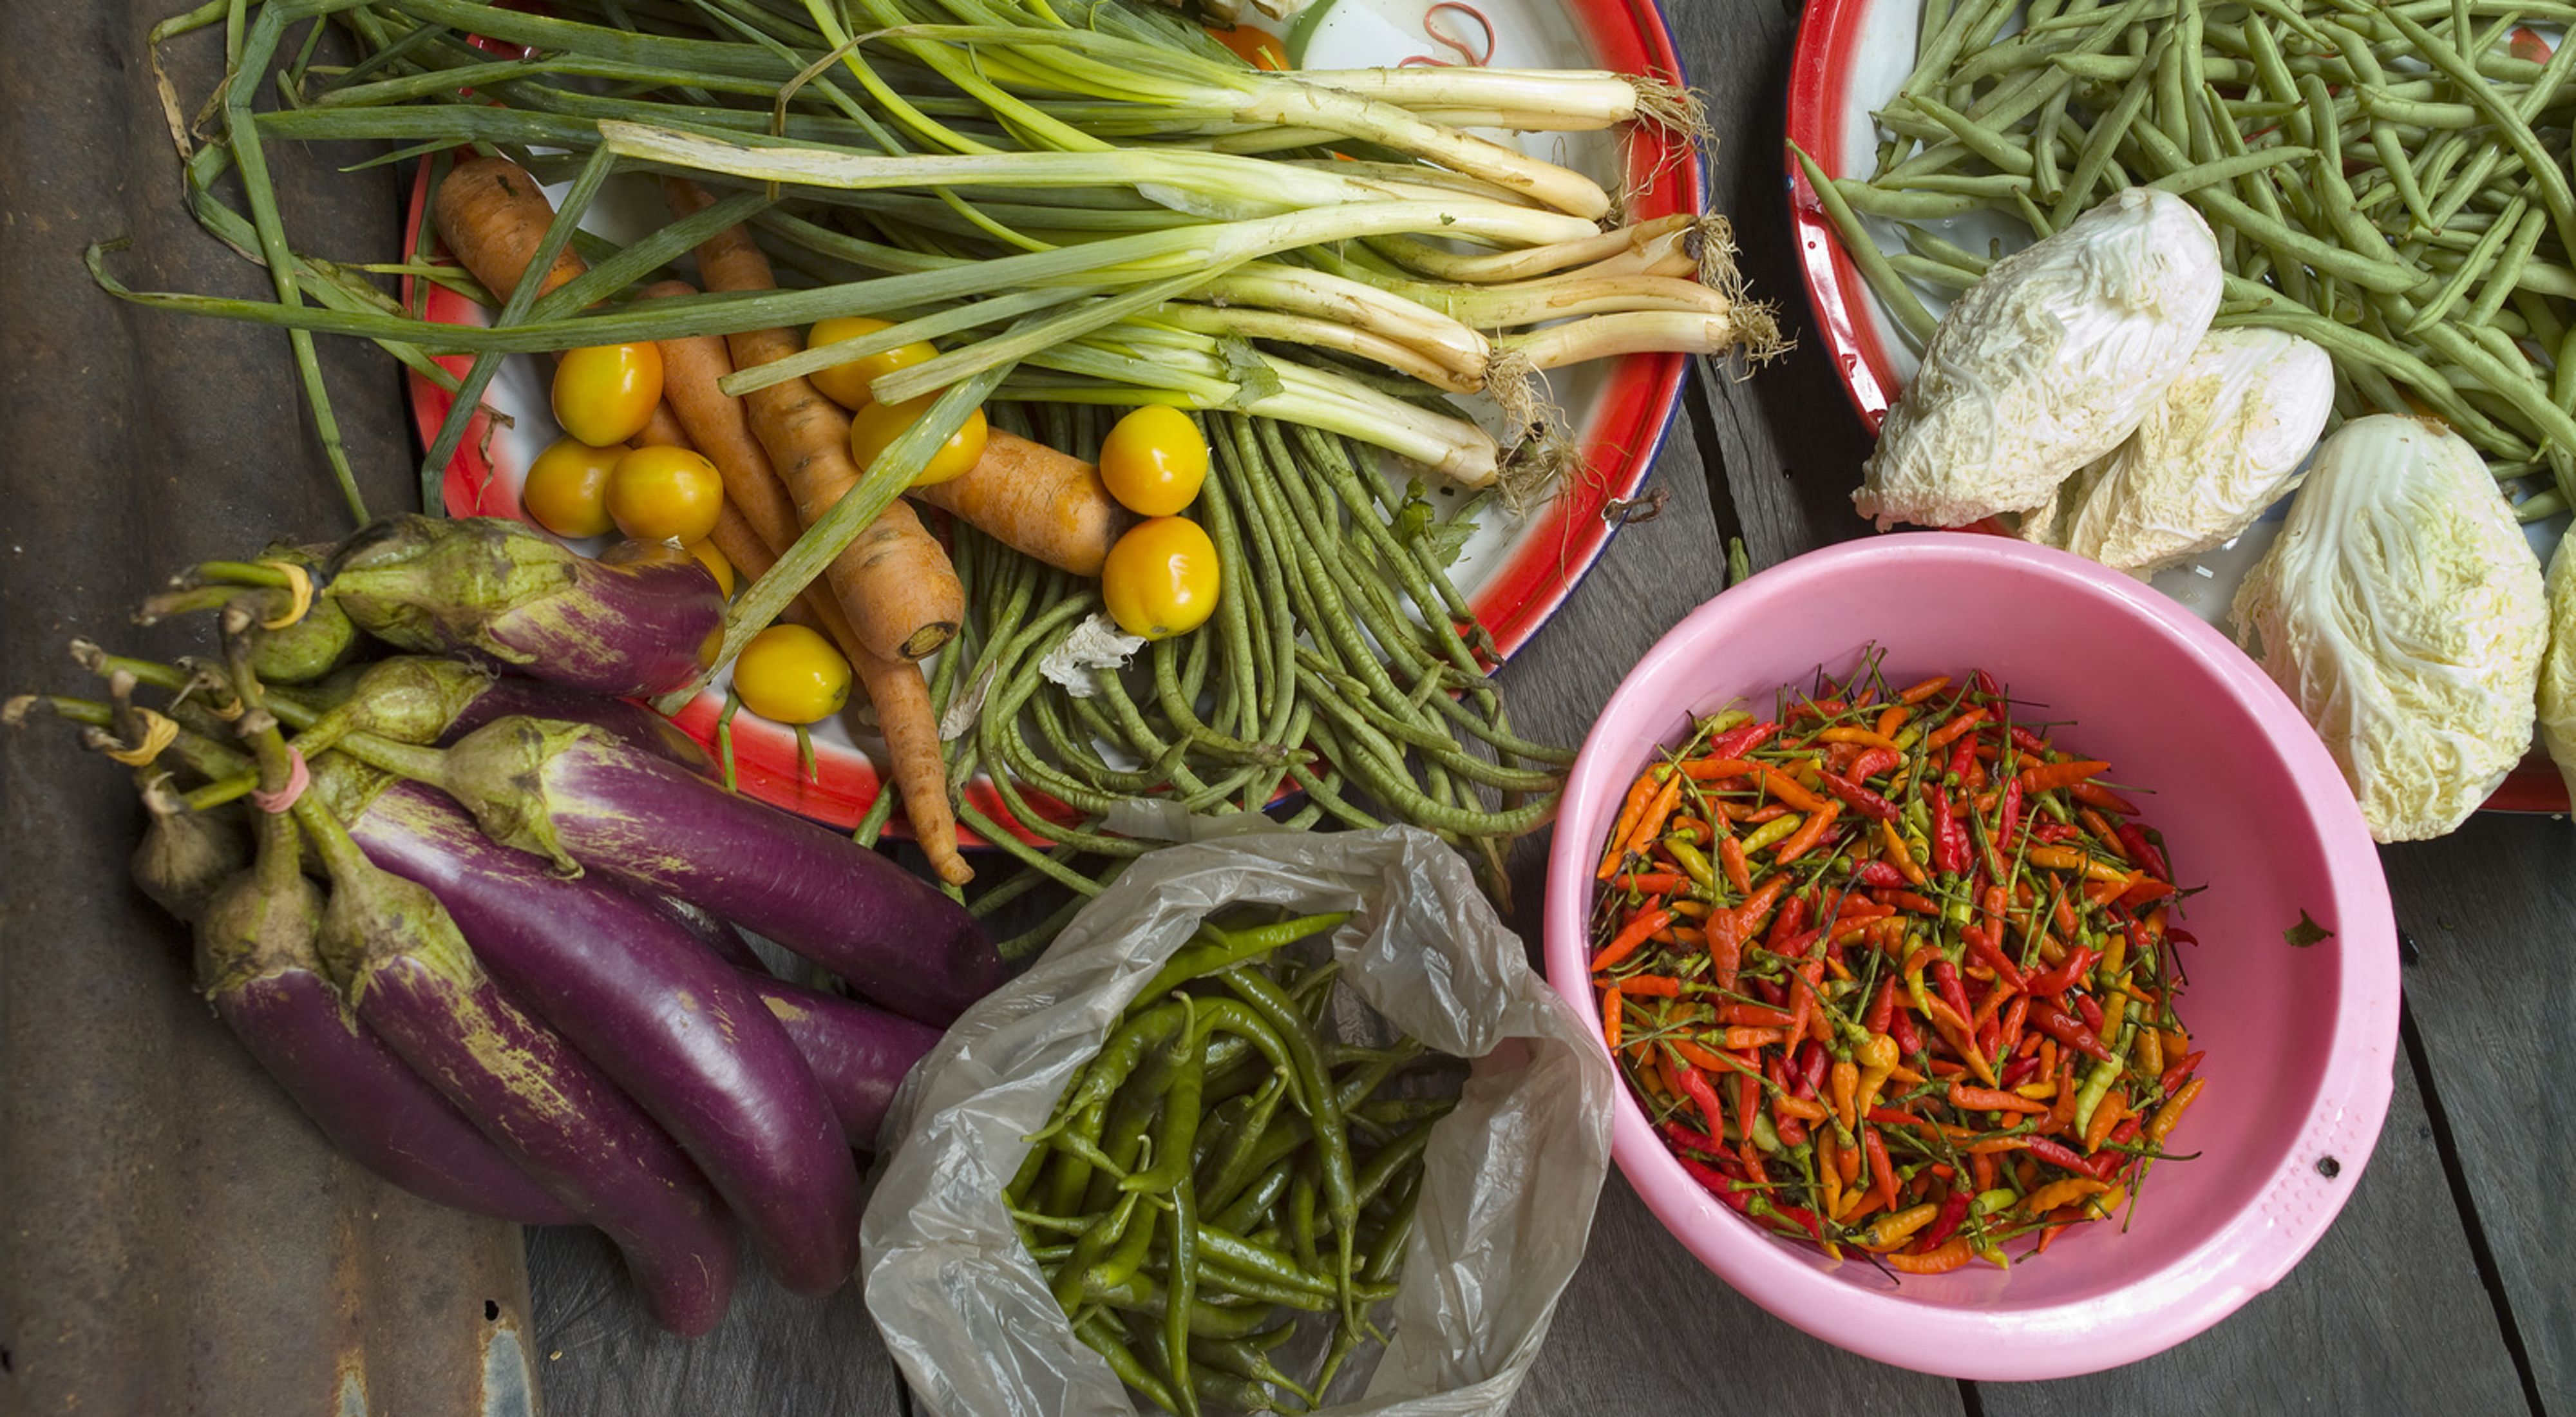 Locally grown and collected vegetables sorted for cooking at Long Laay (Long Laai) village which is situated on the banks of the Sagah River in the Bornean forest of the Berau district, East Kalimantan, Borneo, Indonesia. 